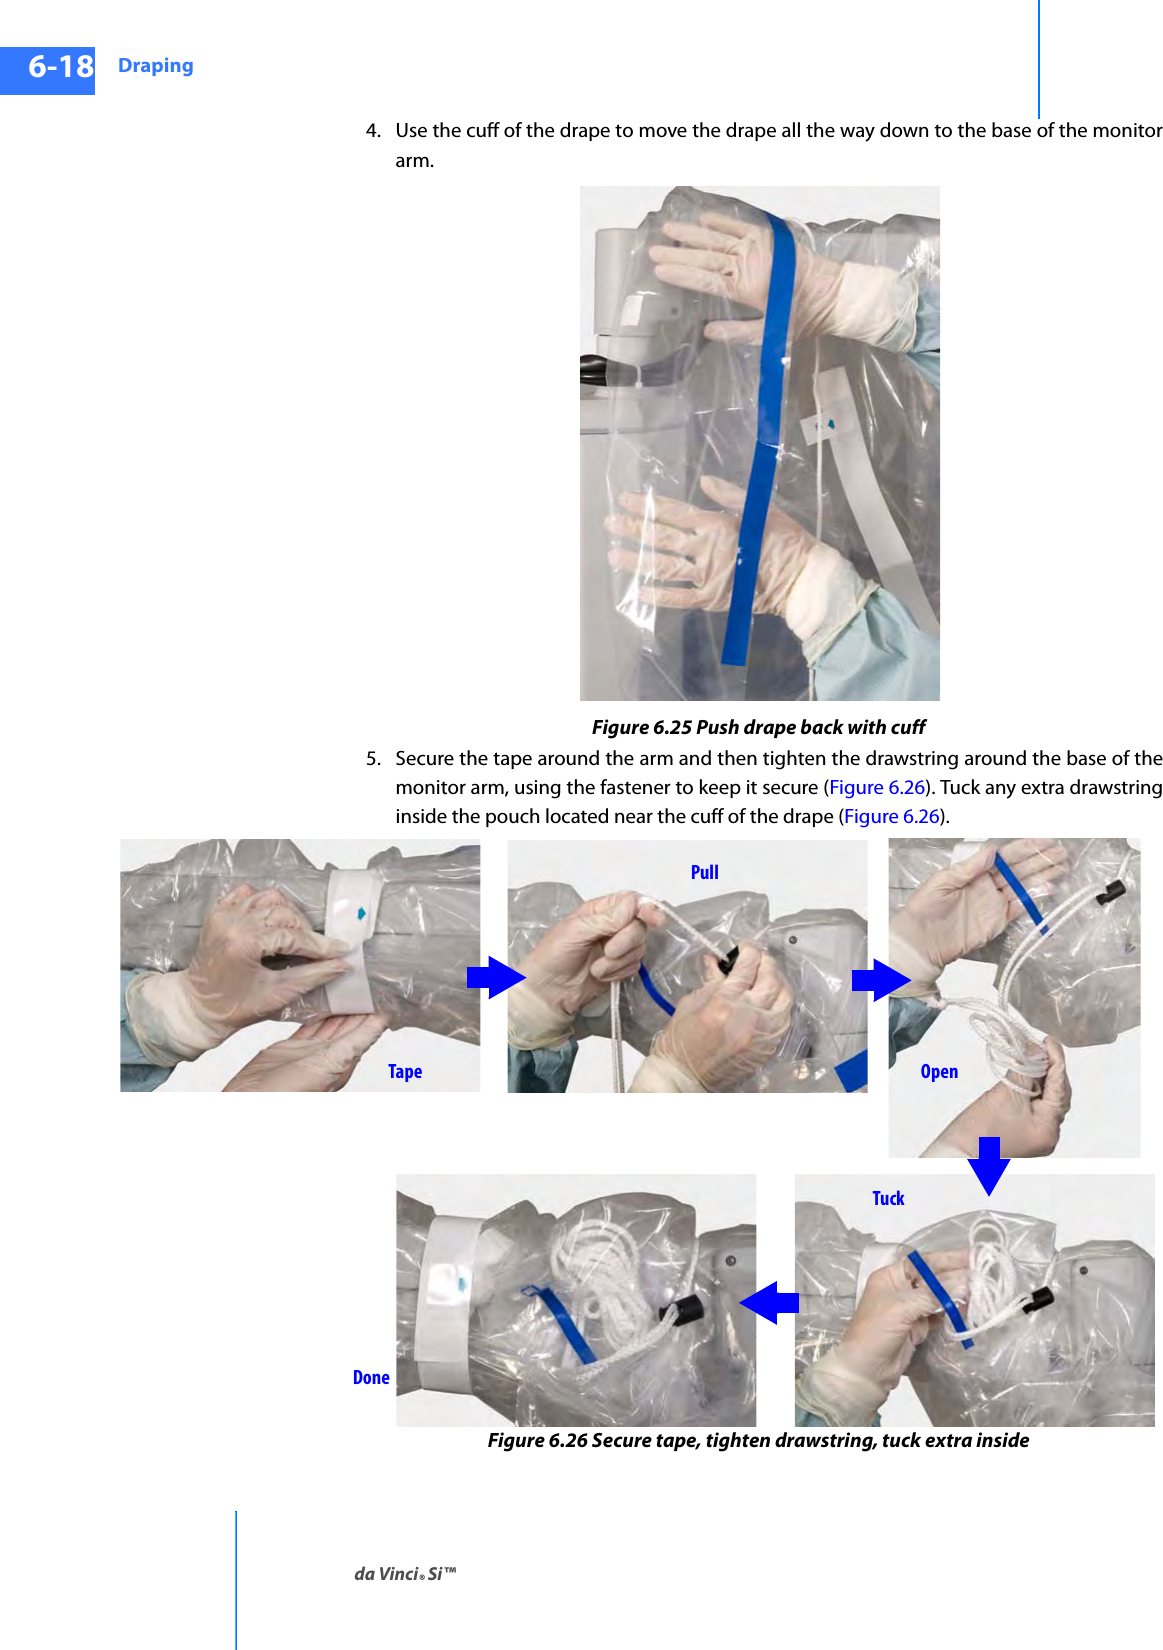 Drapingda Vinci® Si™6-18DRAFT/PRE-RELEASE/CONFIDENTIAL10/9/144. Use the cuff of the drape to move the drape all the way down to the base of the monitor arm.Figure 6.25 Push drape back with cuff5. Secure the tape around the arm and then tighten the drawstring around the base of the monitor arm, using the fastener to keep it secure (Figure 6.26). Tuck any extra drawstring inside the pouch located near the cuff of the drape (Figure 6.26).Figure 6.26 Secure tape, tighten drawstring, tuck extra insidePullOpenTuckDoneTape